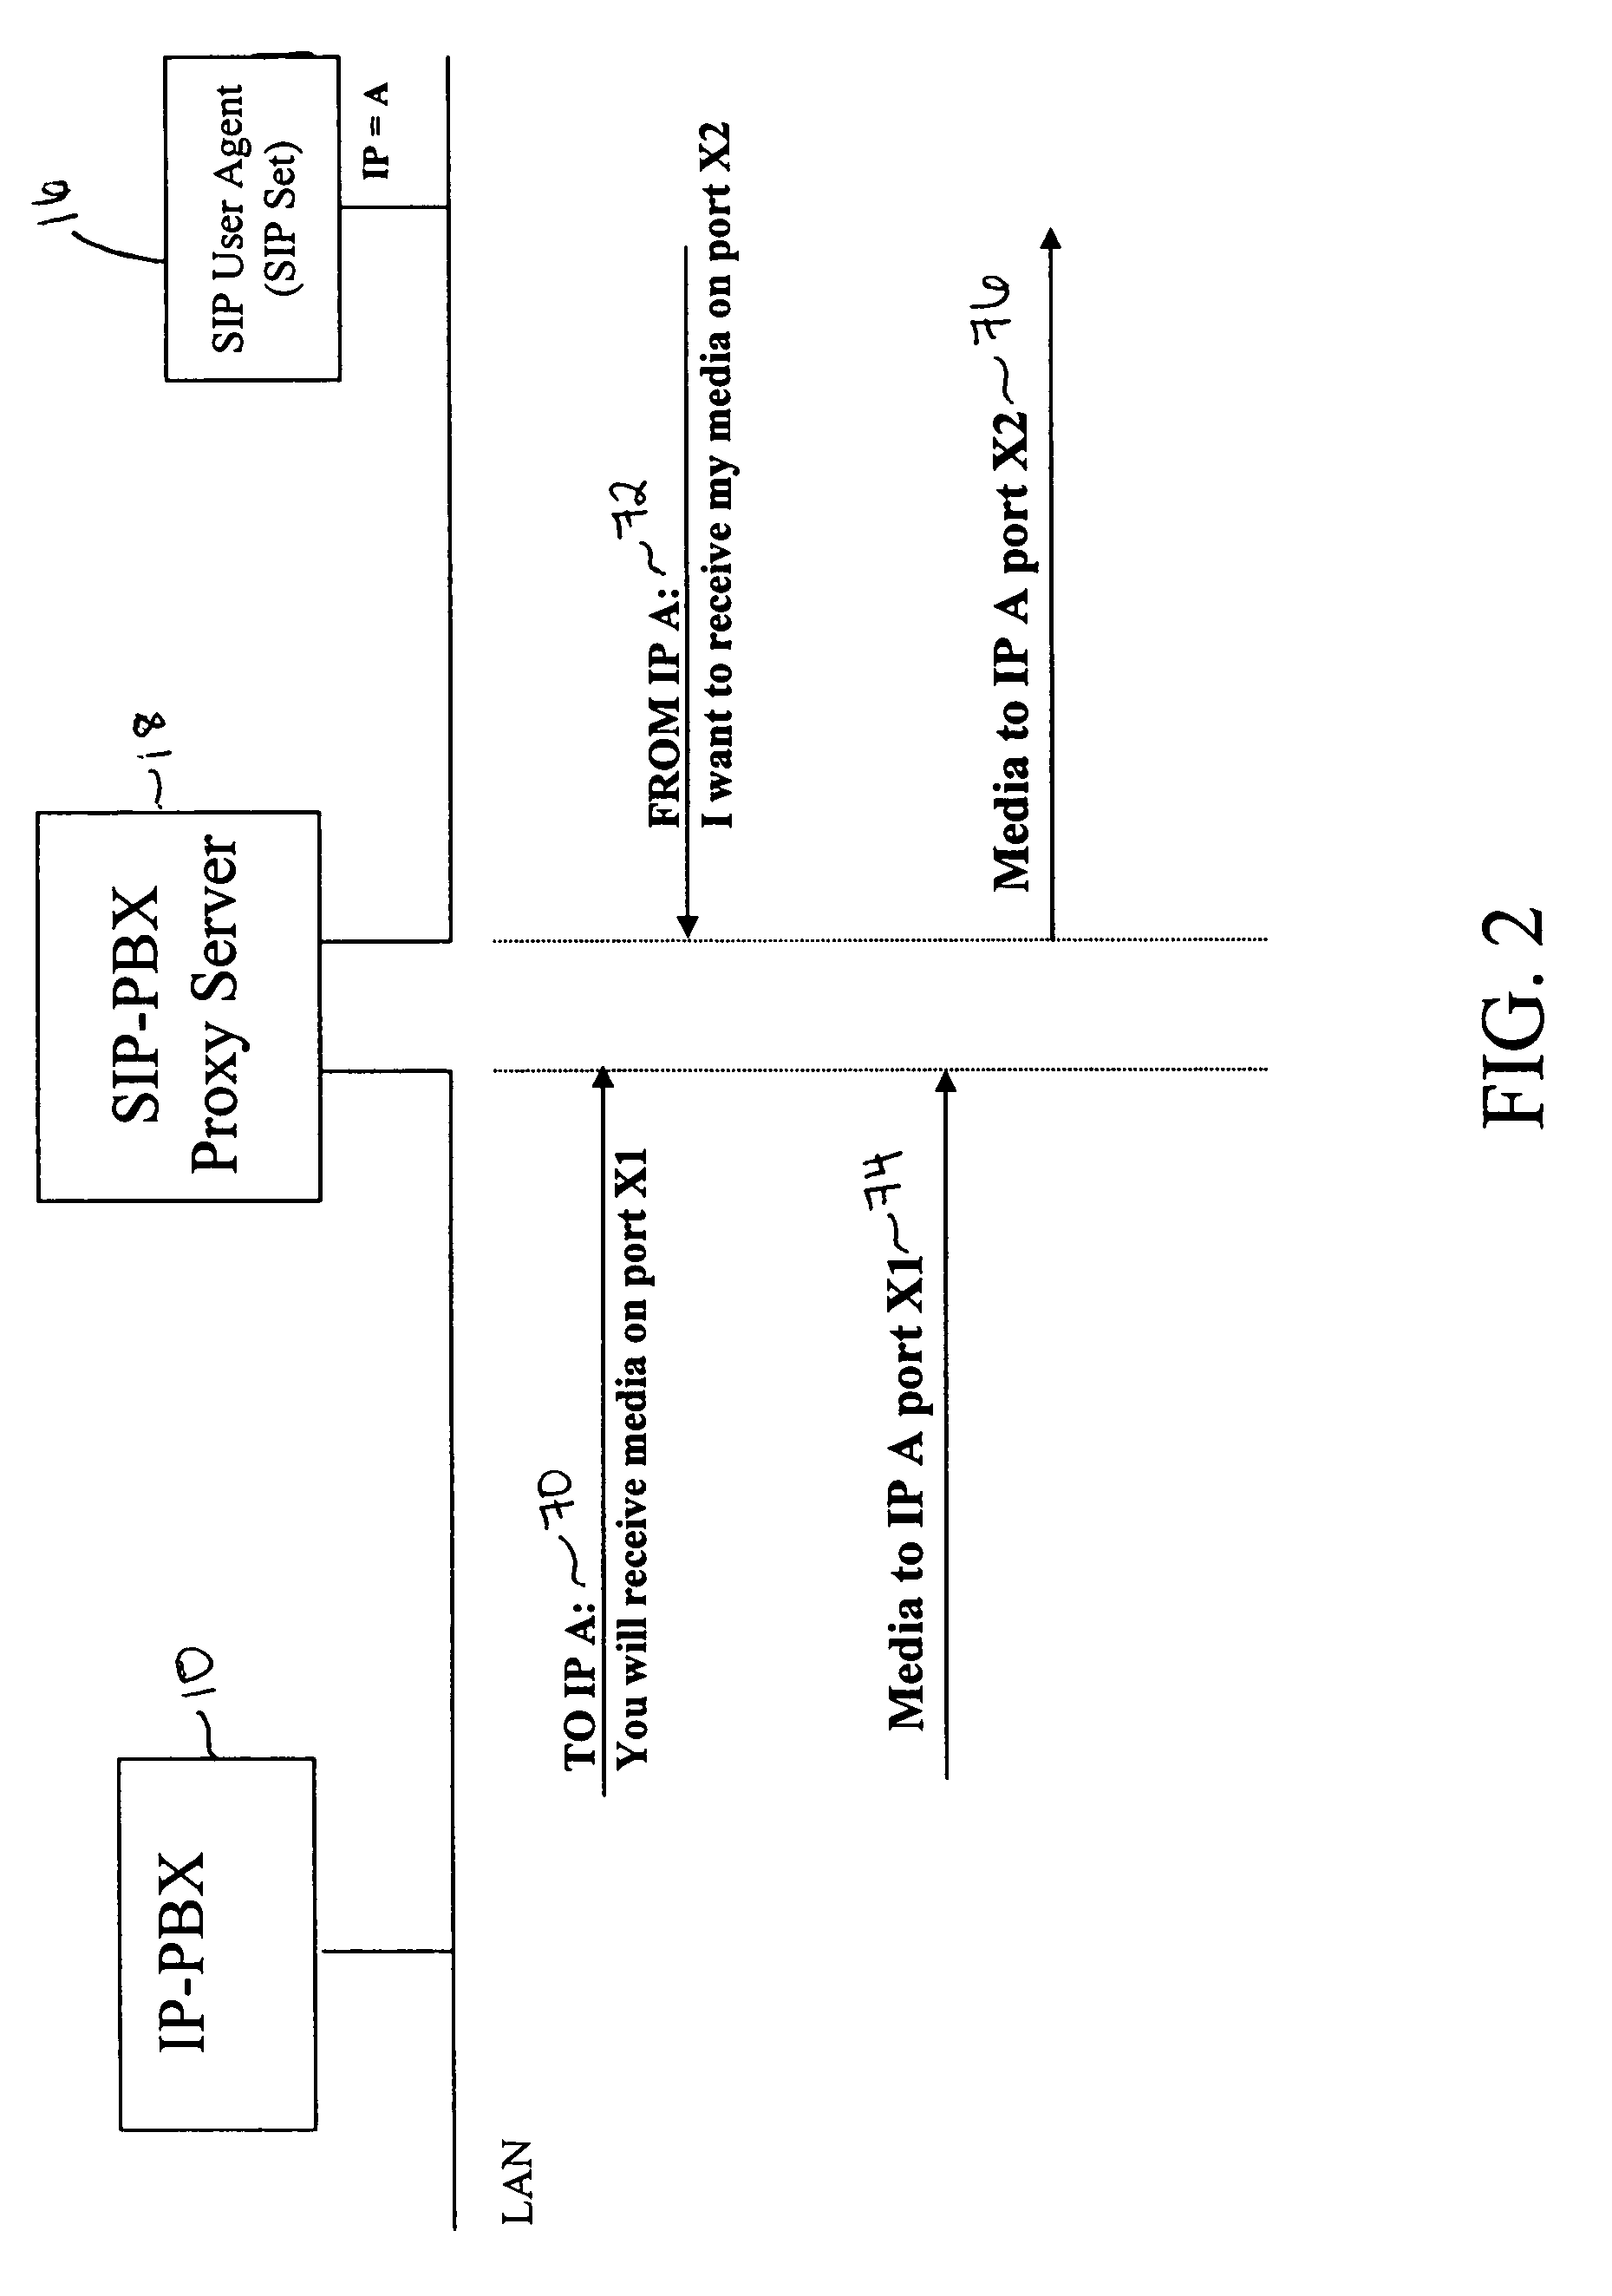 System and method for interfacing legacy IP-PBX systems to SIP networks